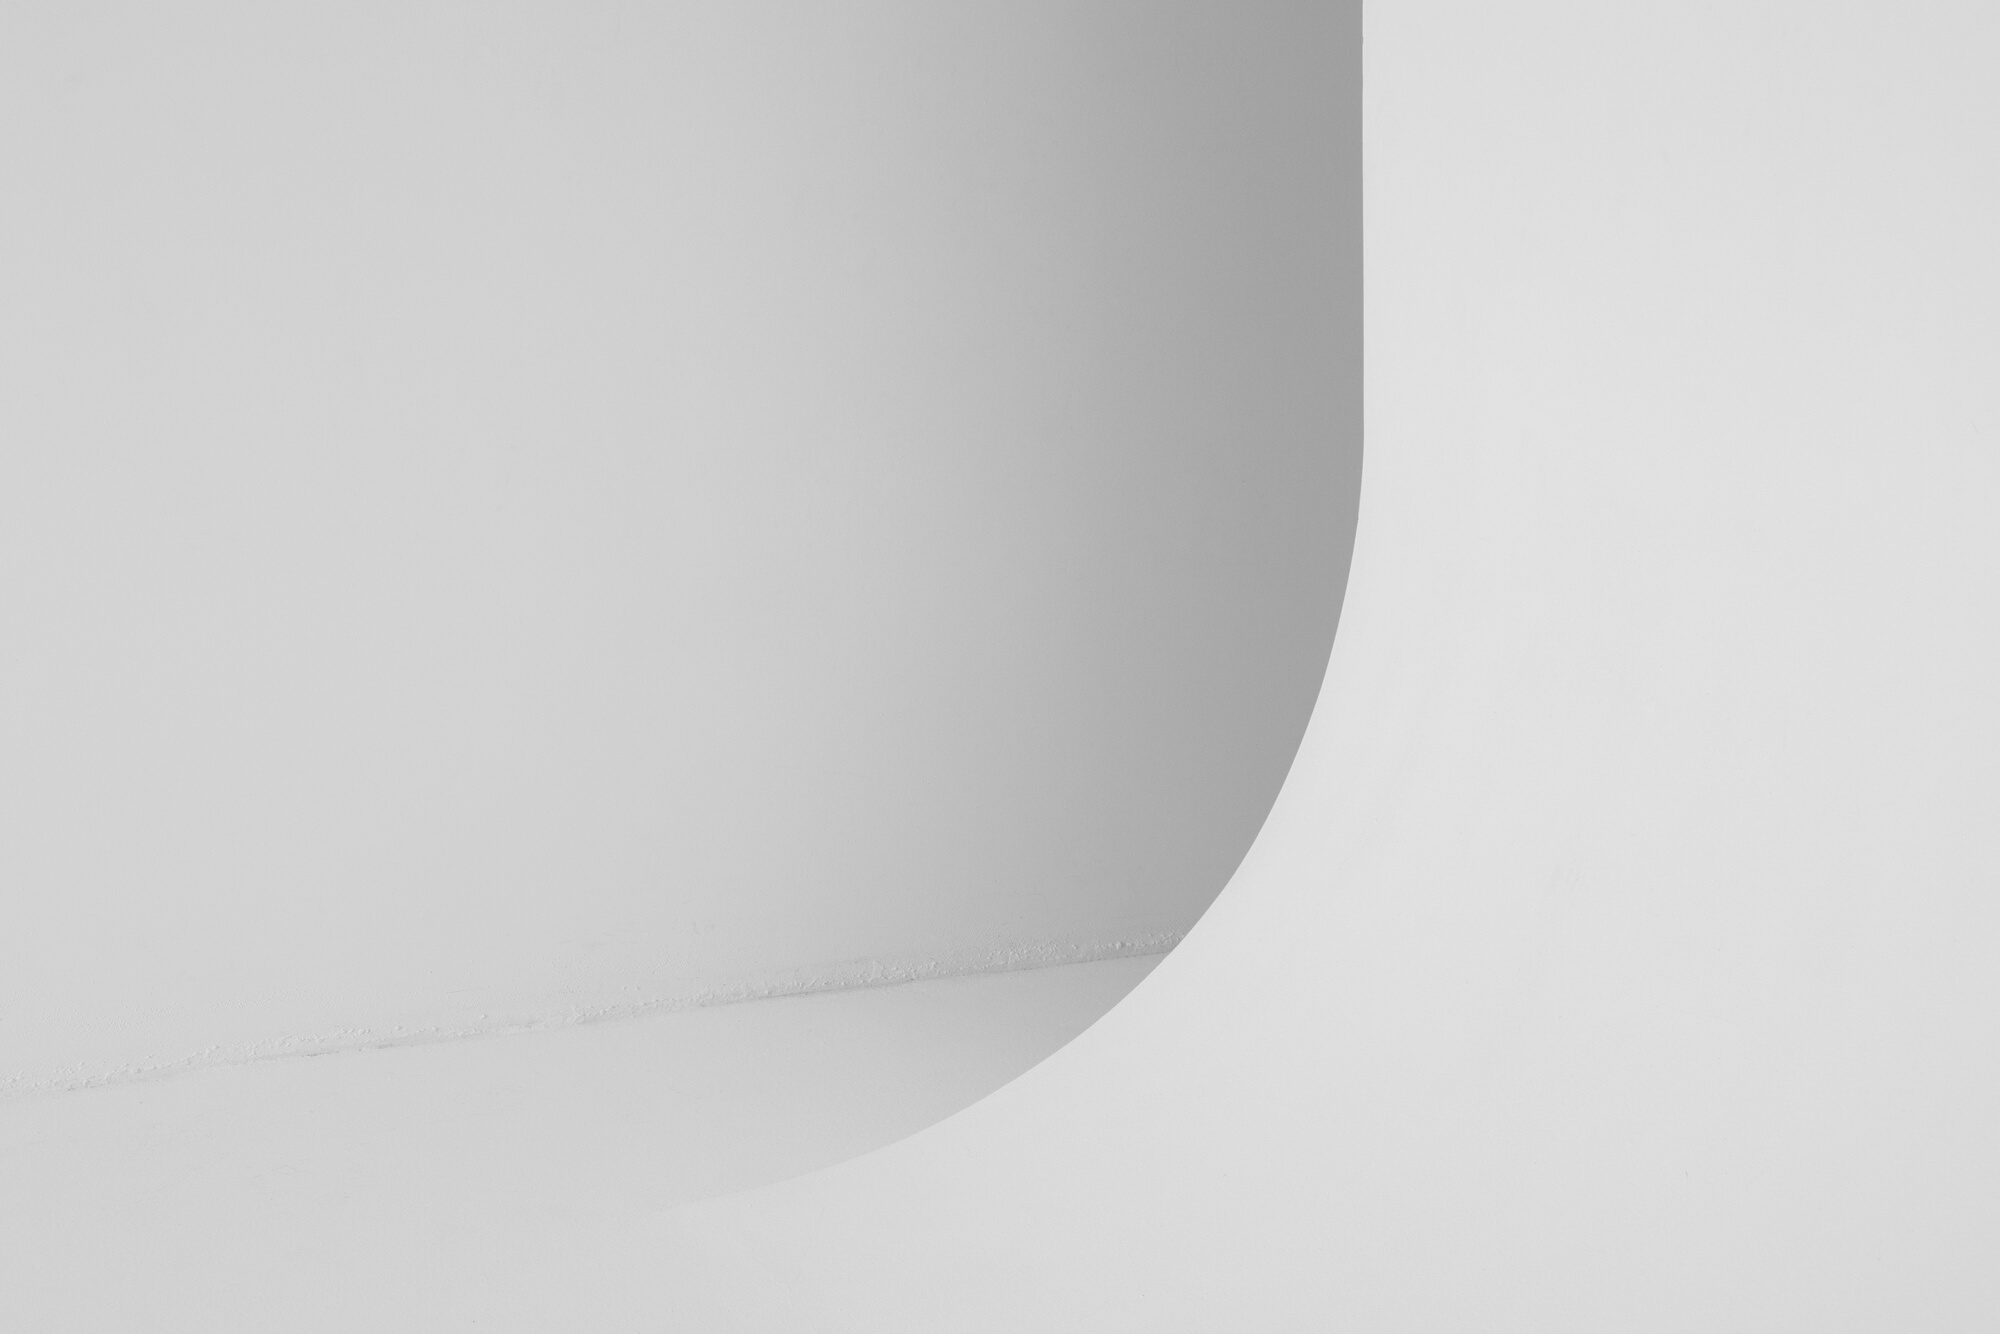 Abstract blank white photo studio interior background, cyclorama structure